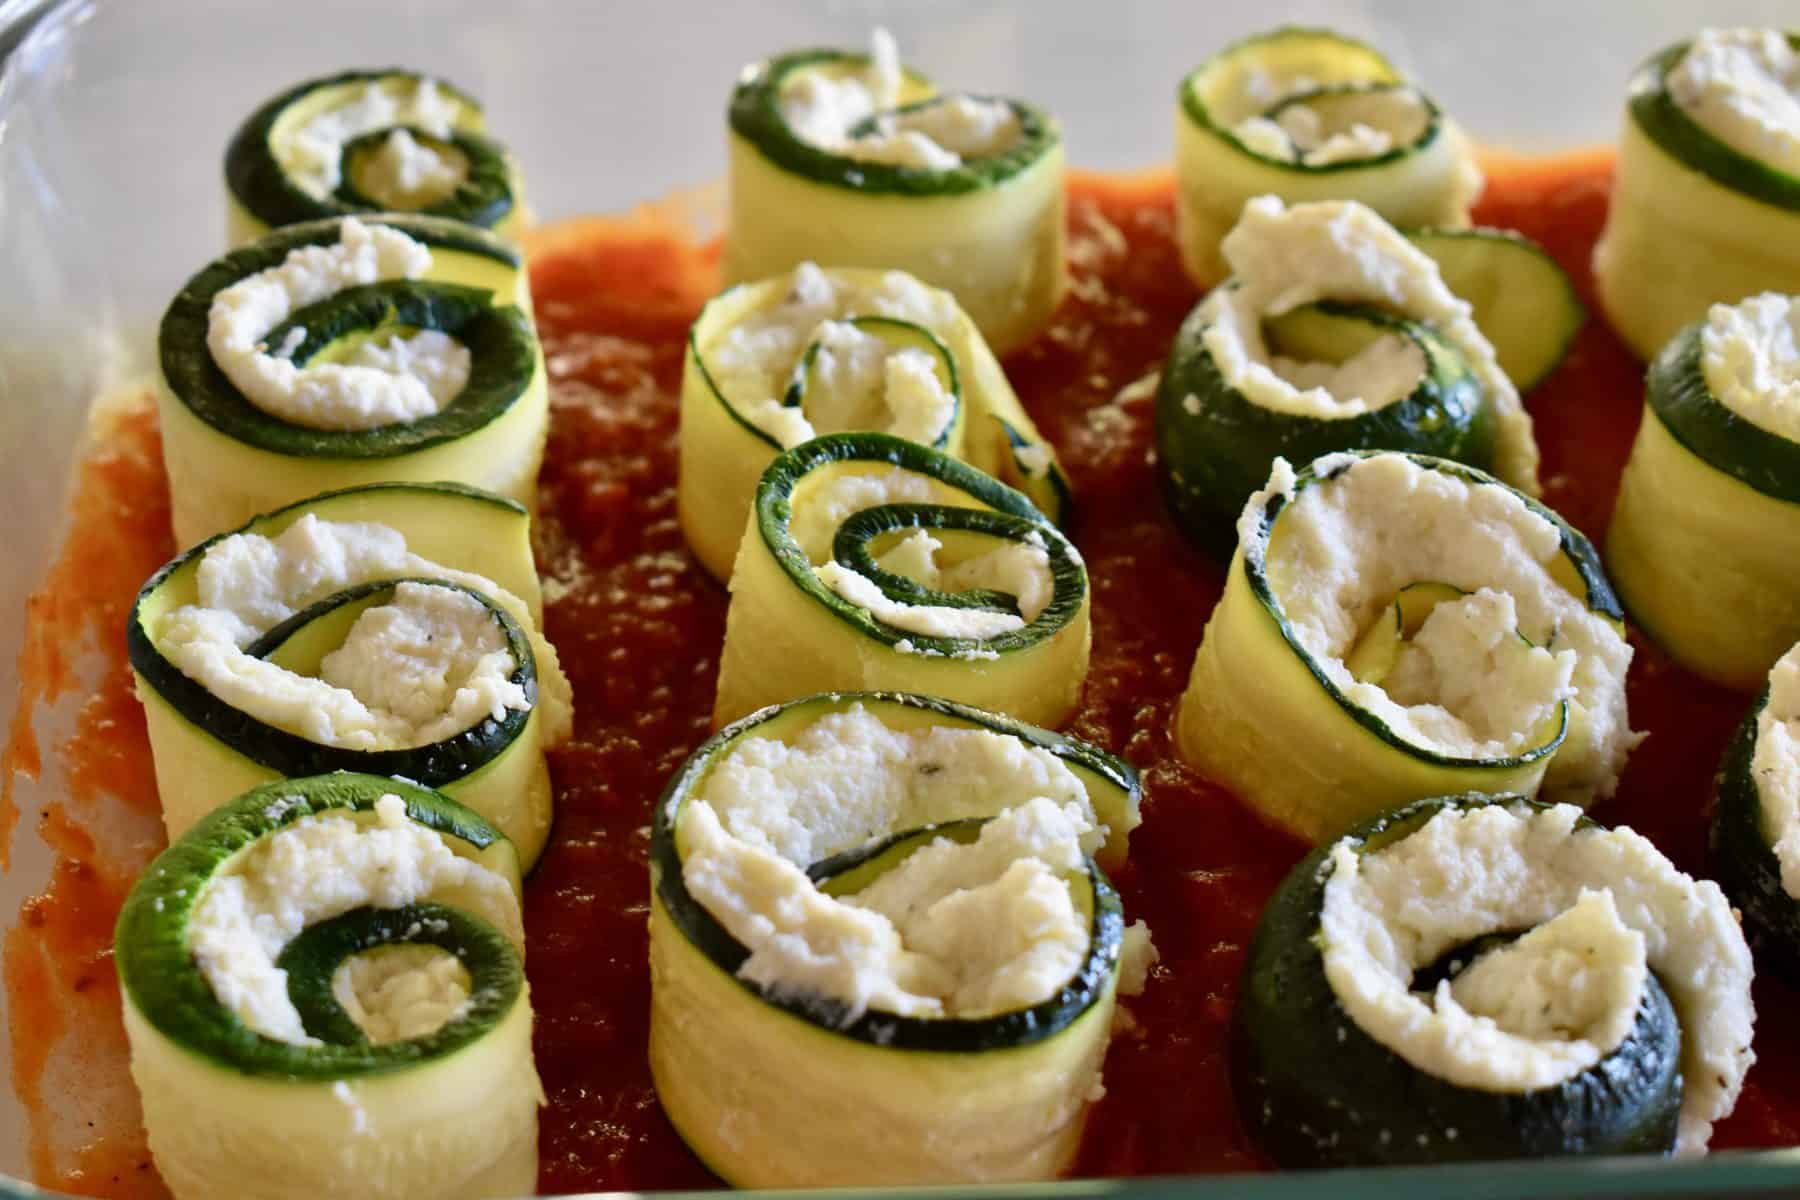 Zucchini ricotta rolls up standing upright in a glass baking pan with marinara sauce on the bottom. 